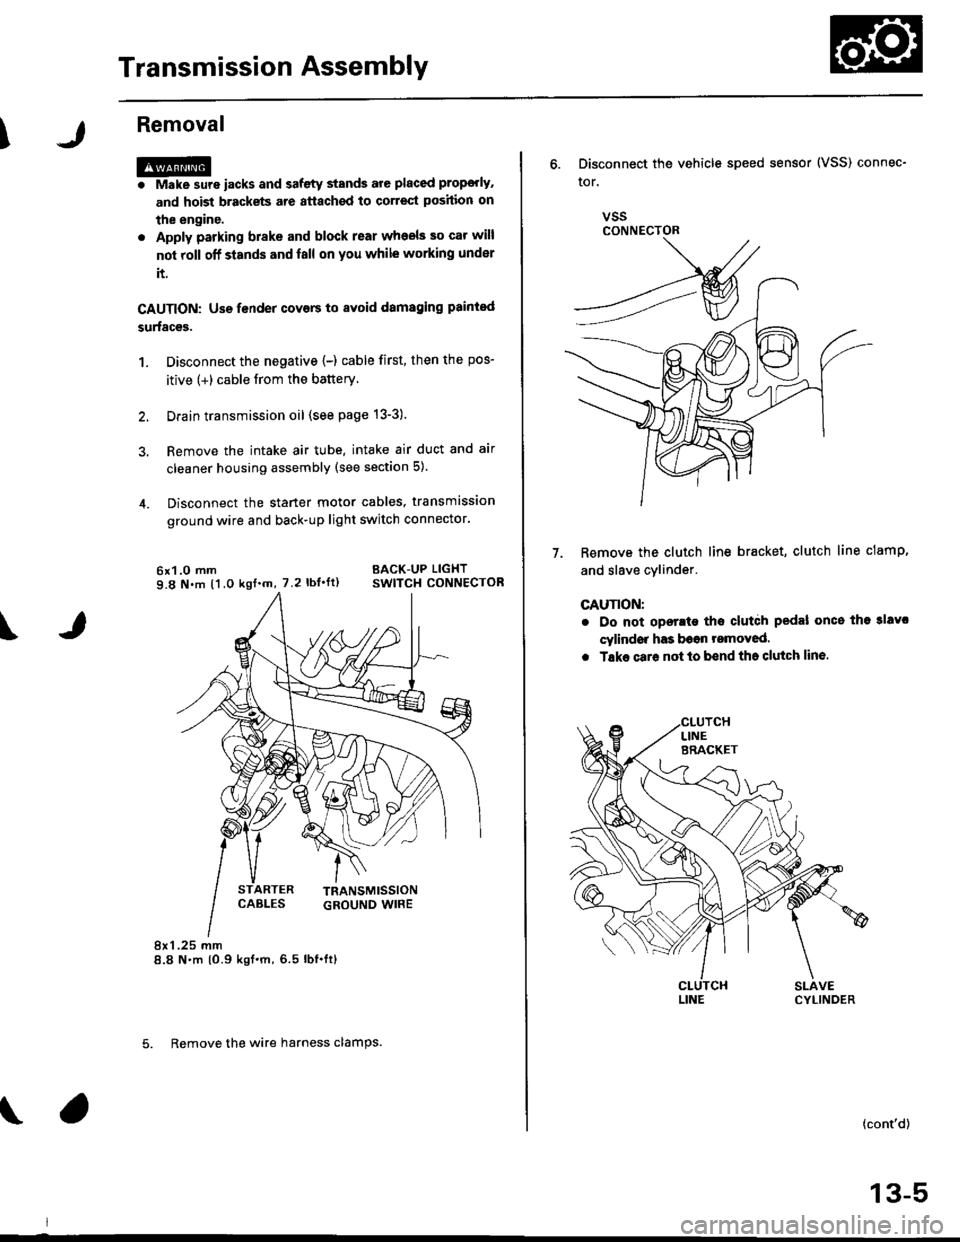 HONDA CIVIC 1996 6.G Service Manual Transmission Assembly
I
Removal
@. Make sure iacks and safety stands are placed prop€dy,
and hoist brackets are atlach€d to correct position on
the enginc.
. Apply parking brake and block rear who